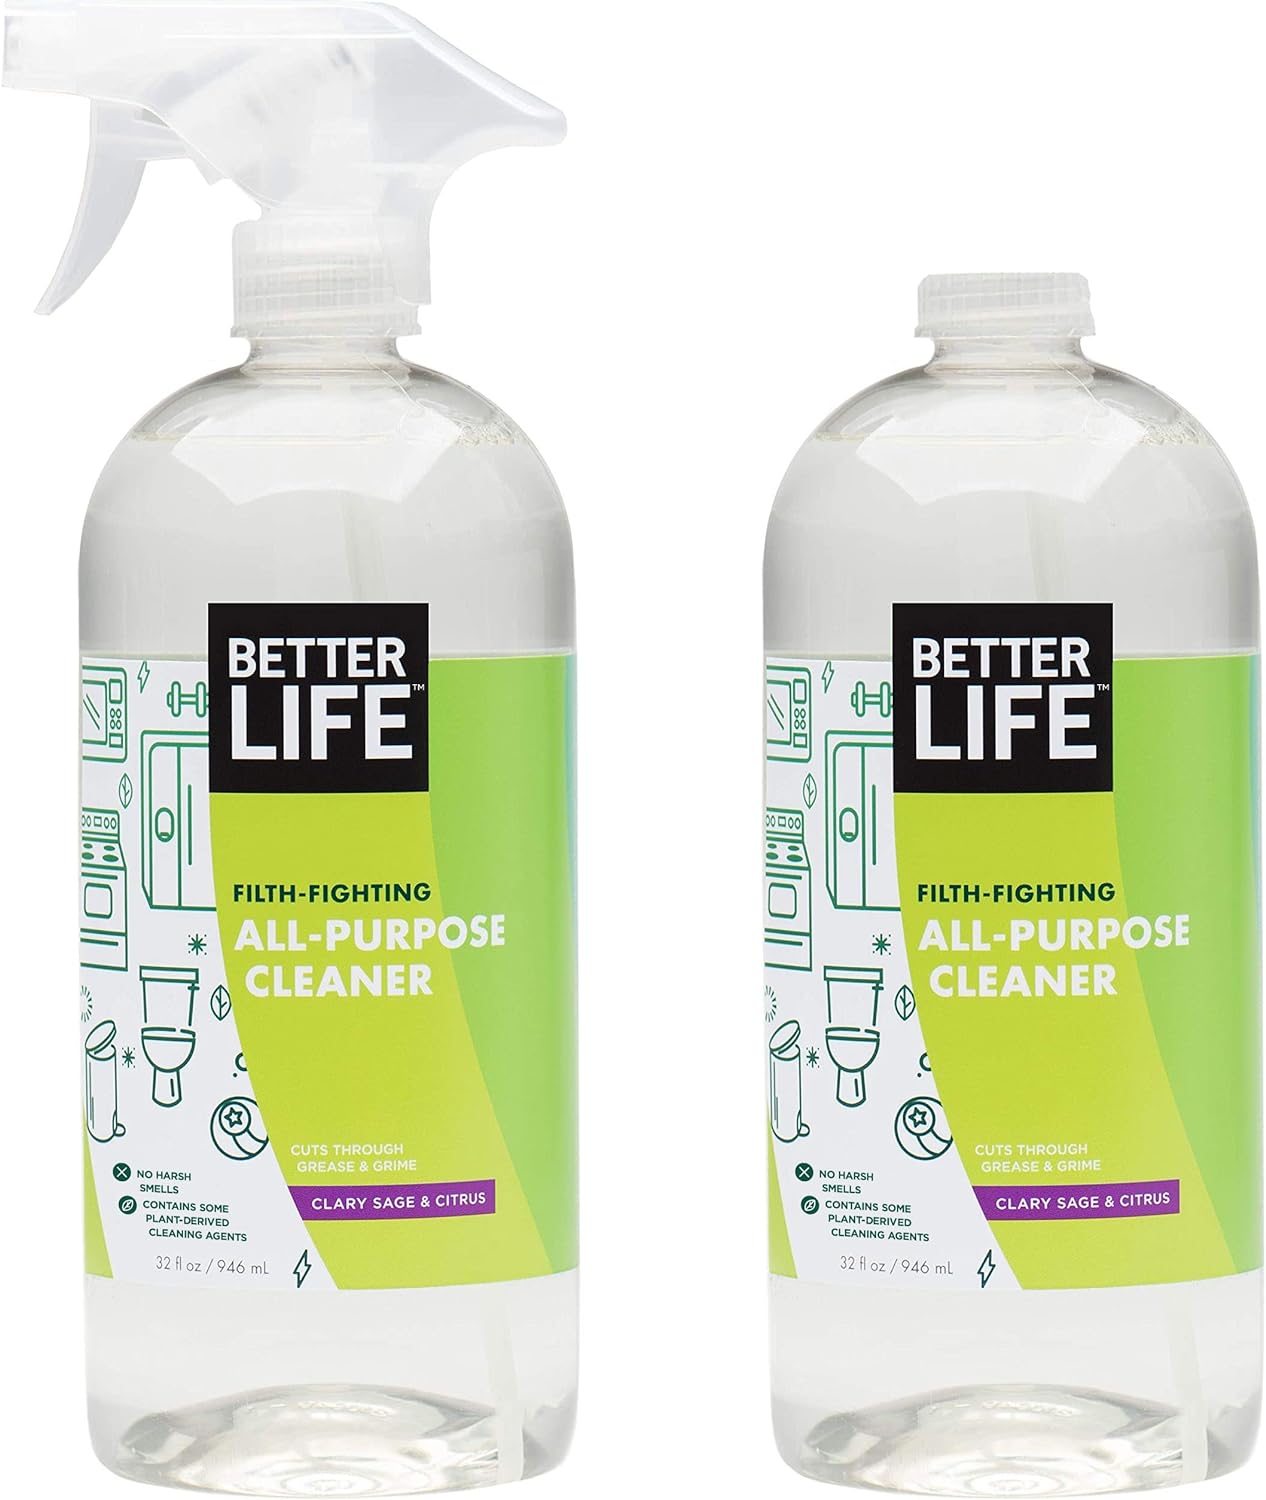 Better Life All-Purpose Cleaner has truly been a game-changer in our household cleaning routine. It has proven itself as a versatile and highly effective solution, particularly in our bathrooms, on tile surfaces, and floors. This cleaner excels at lifting dirt and grime that other products have struggled to remove.One of the standout features of Better Life is its powerful cleaning ability. It effortlessly tackles soap scum, water stains, and other stubborn bathroom grime, leaving surfaces looki